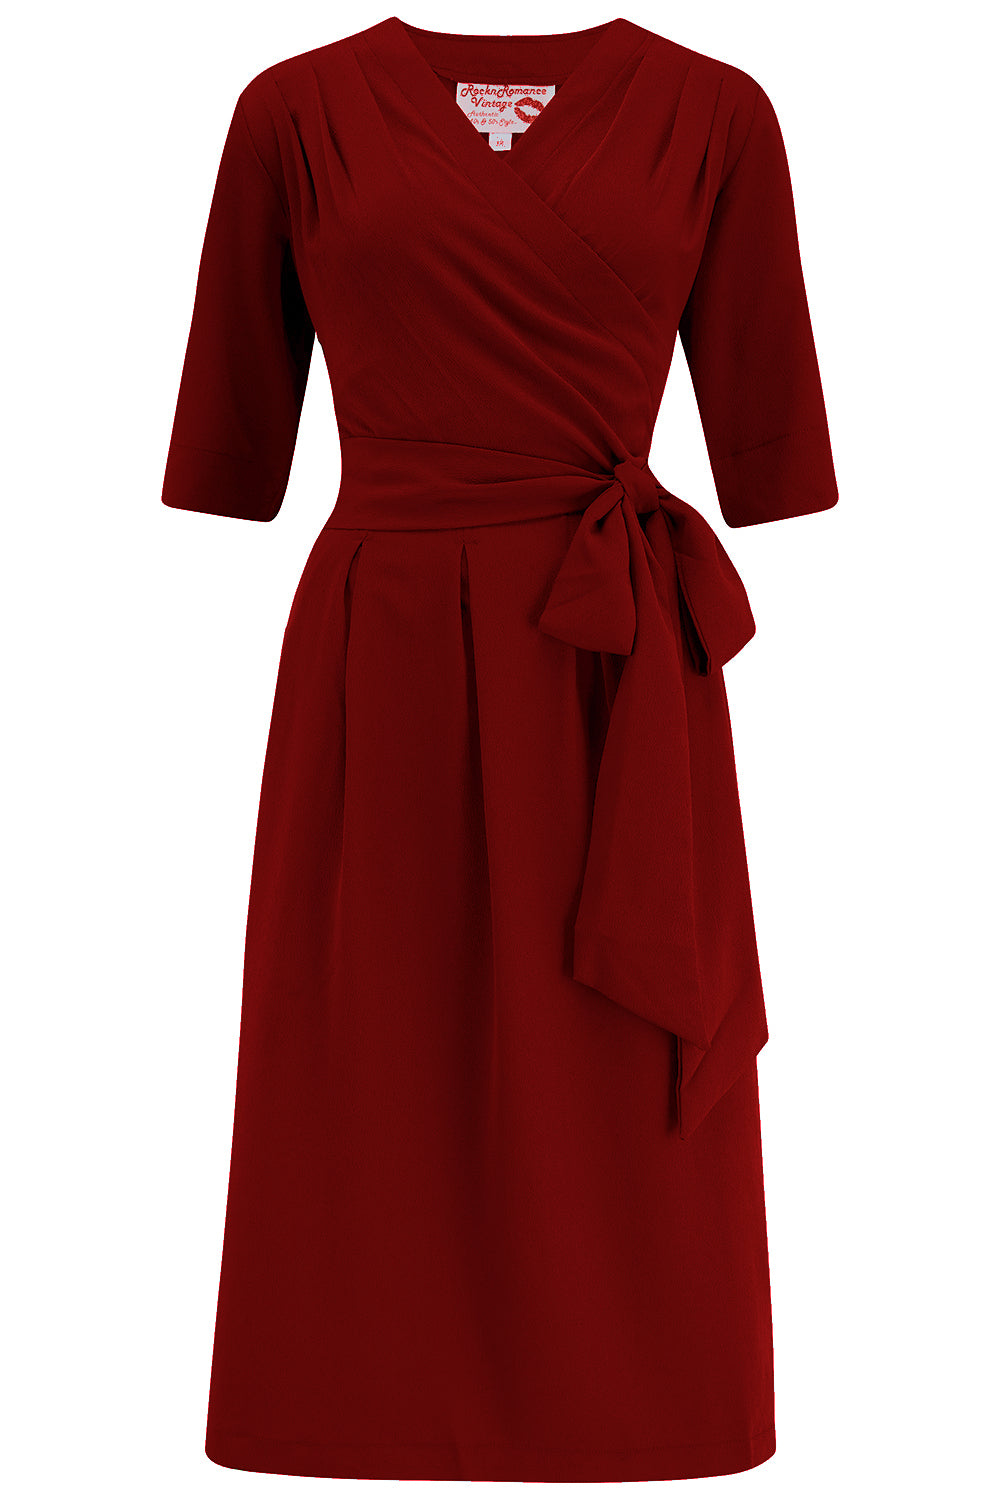 1950s Swing Dresses | 50s Swing Dress The Vivien Full Wrap Dress in Wine True 1940s To Early 1950s Style £49.95 AT vintagedancer.com